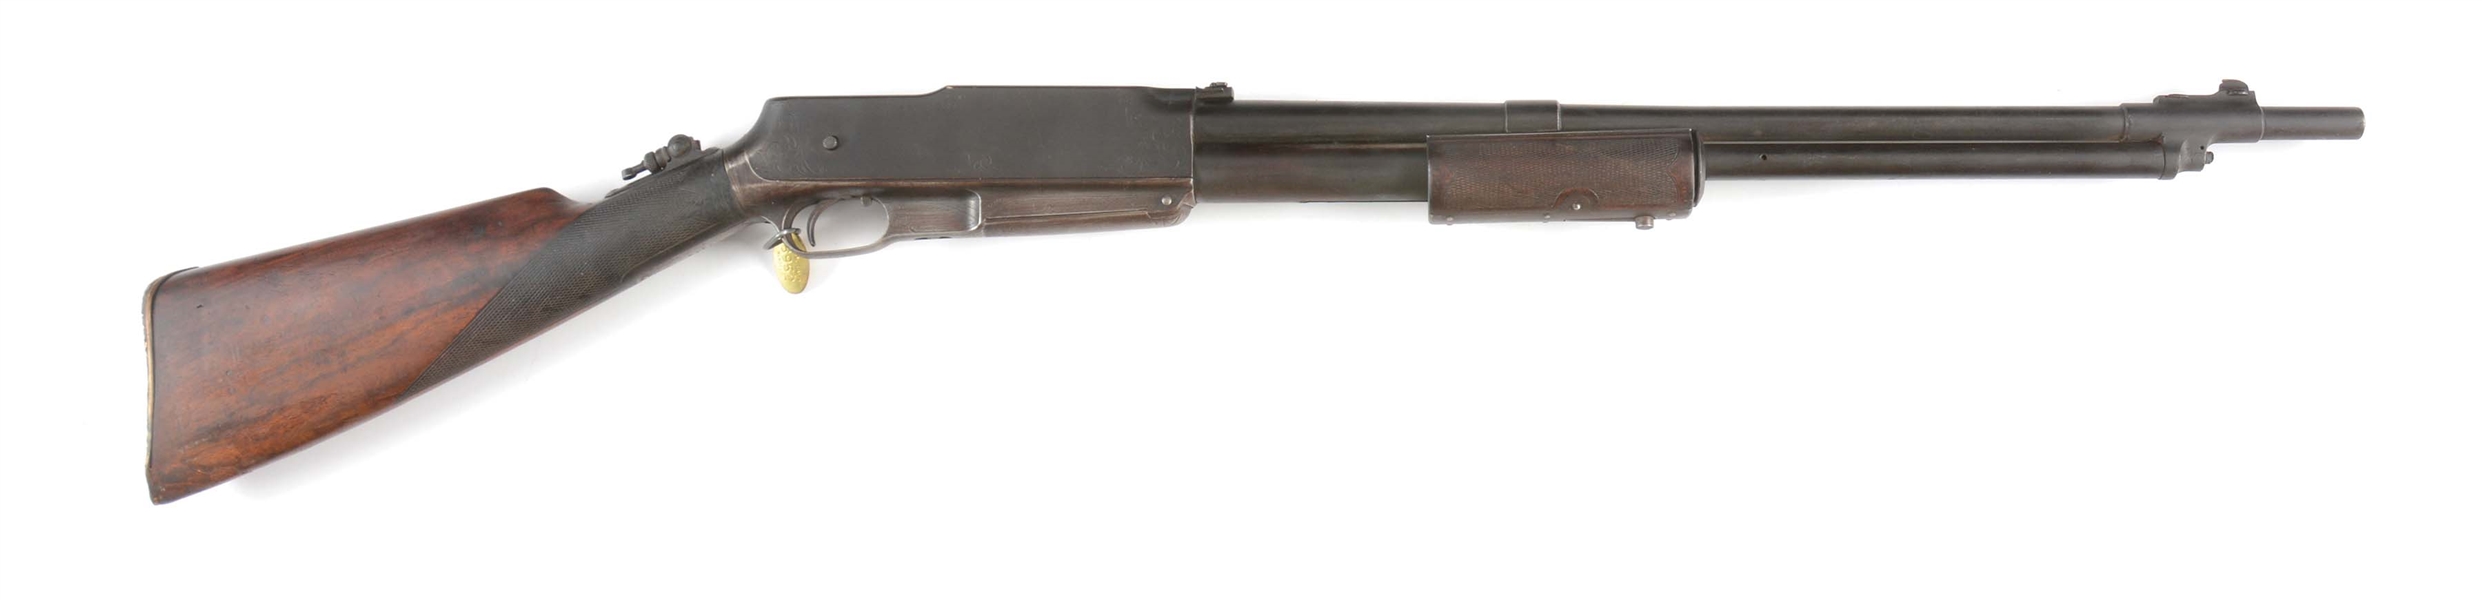 (C) EXCEPTIONALLY RARE STANDARD ARMS CO. MODEL G DELUXE PUMP & SEMI-AUTOMATIC .25 RIFLE.